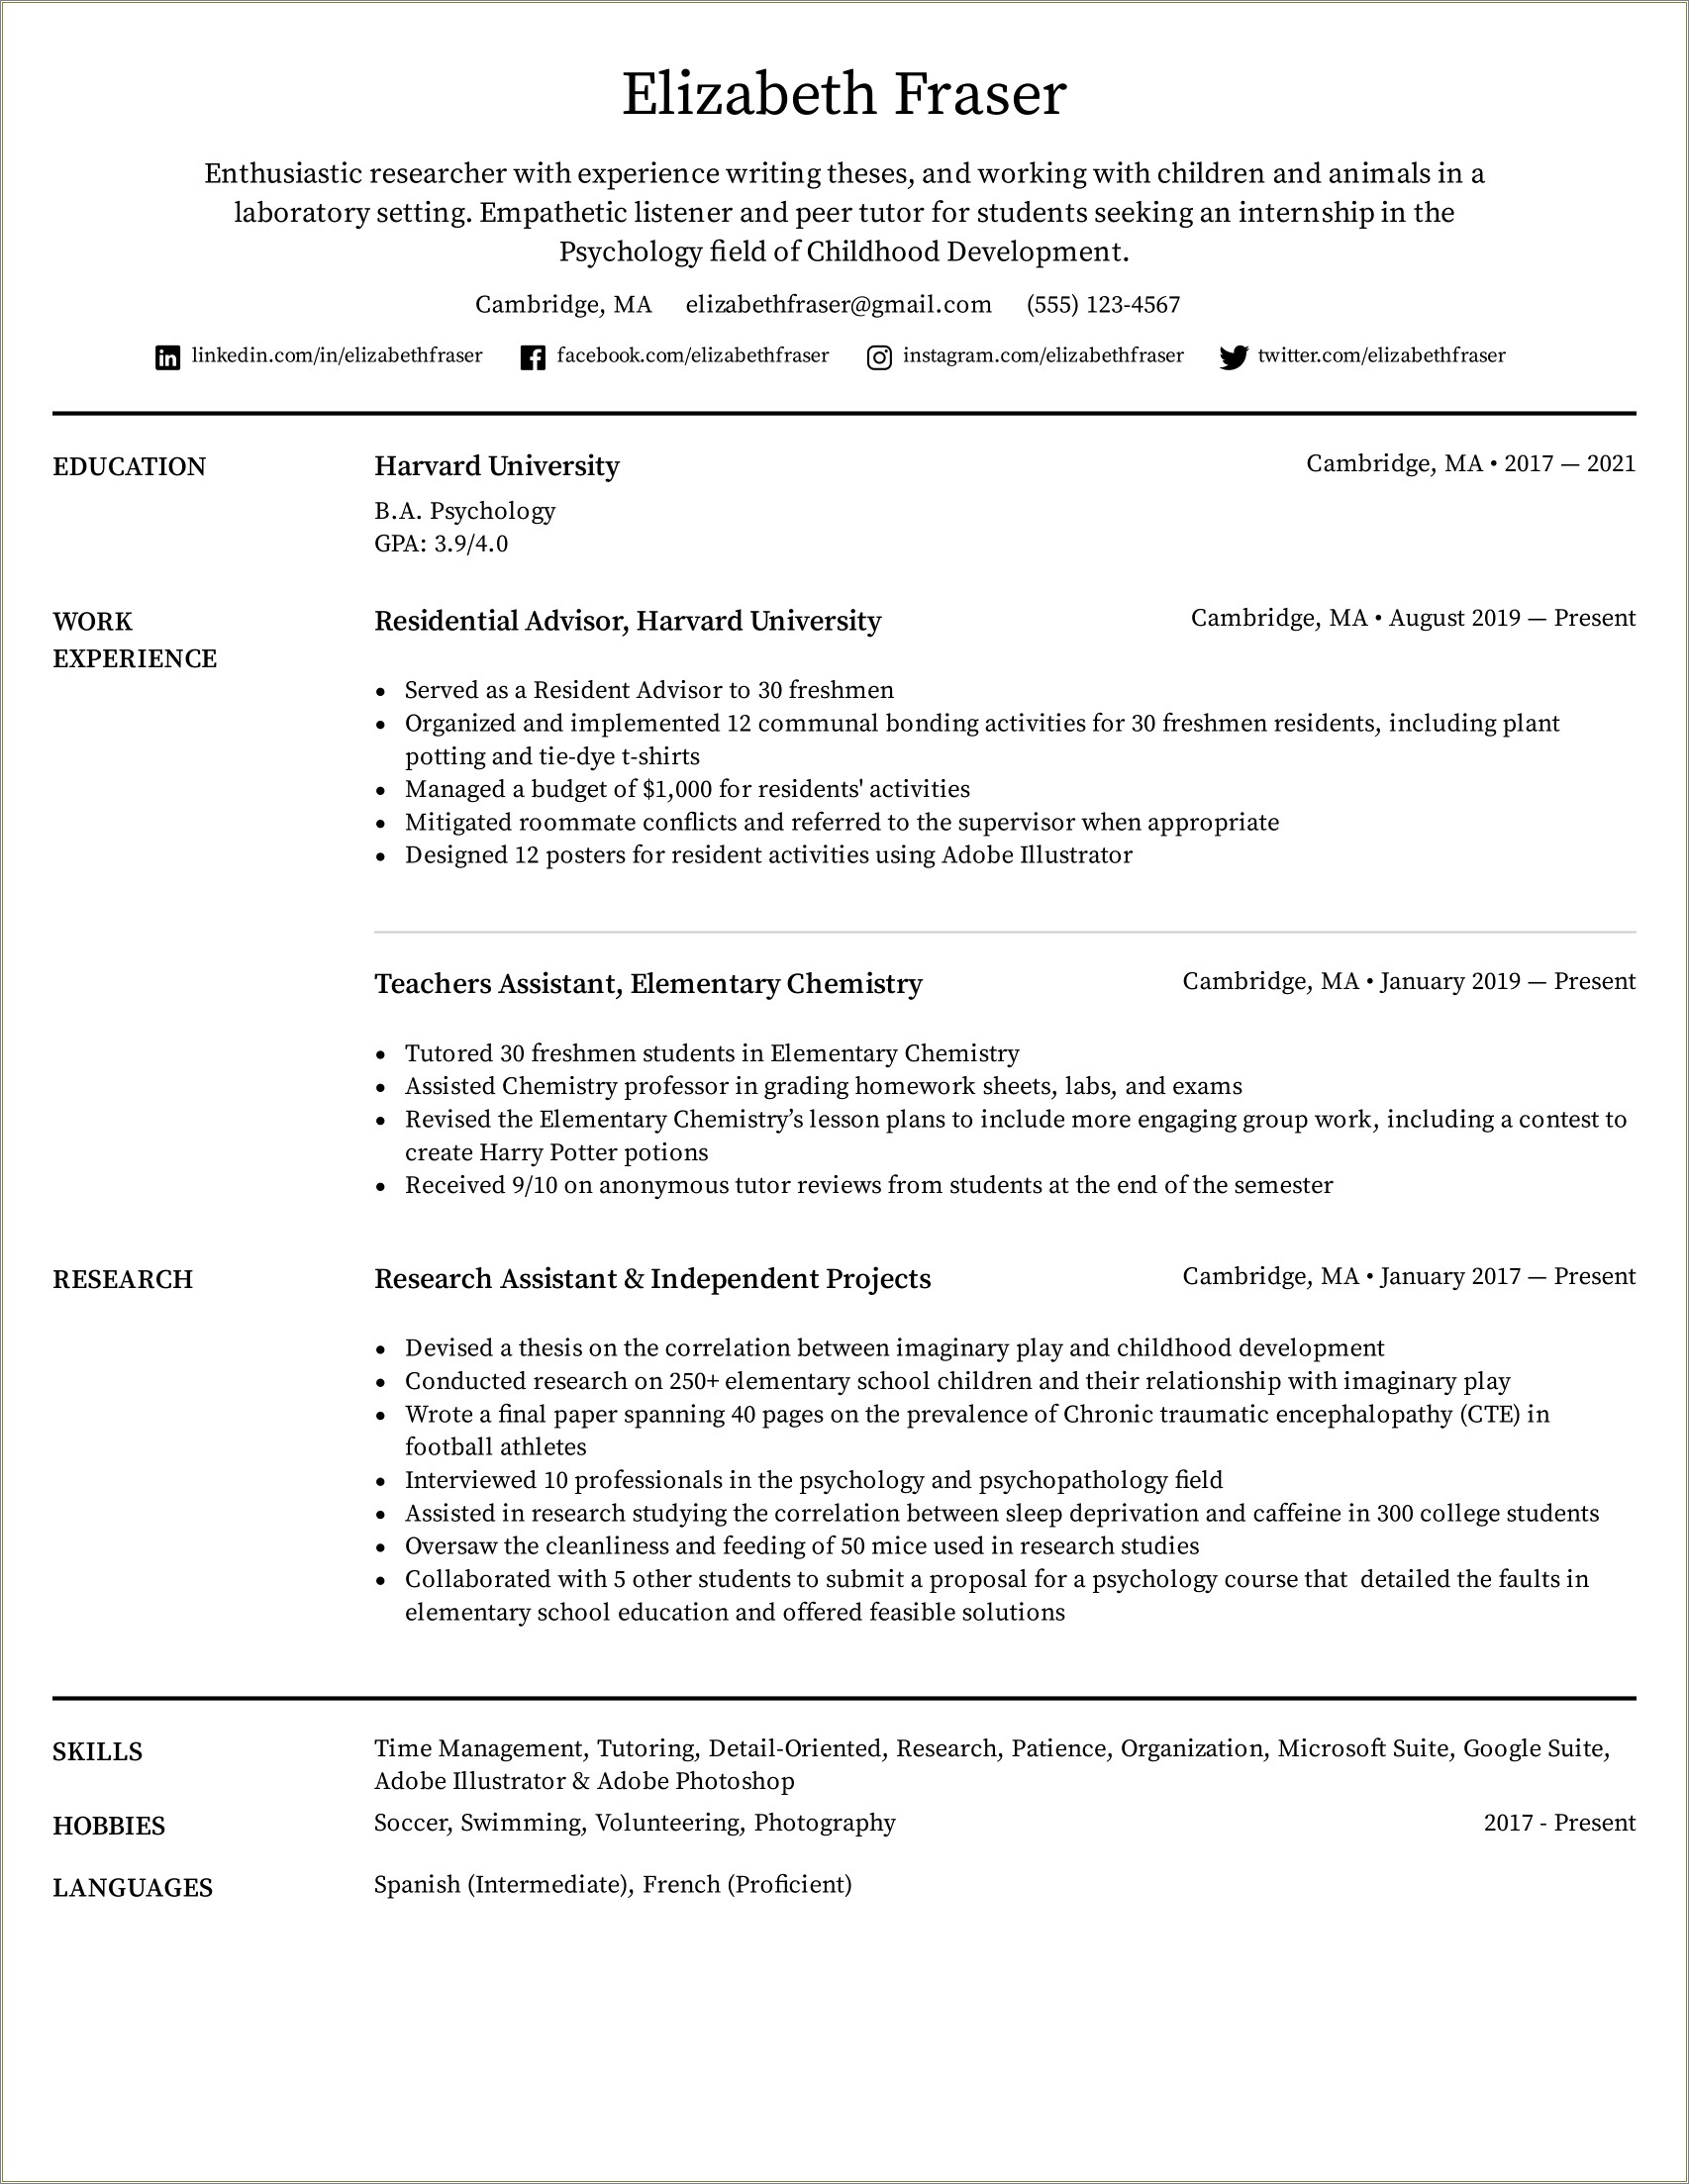 Are Summer Jobs Good On Resumes For University